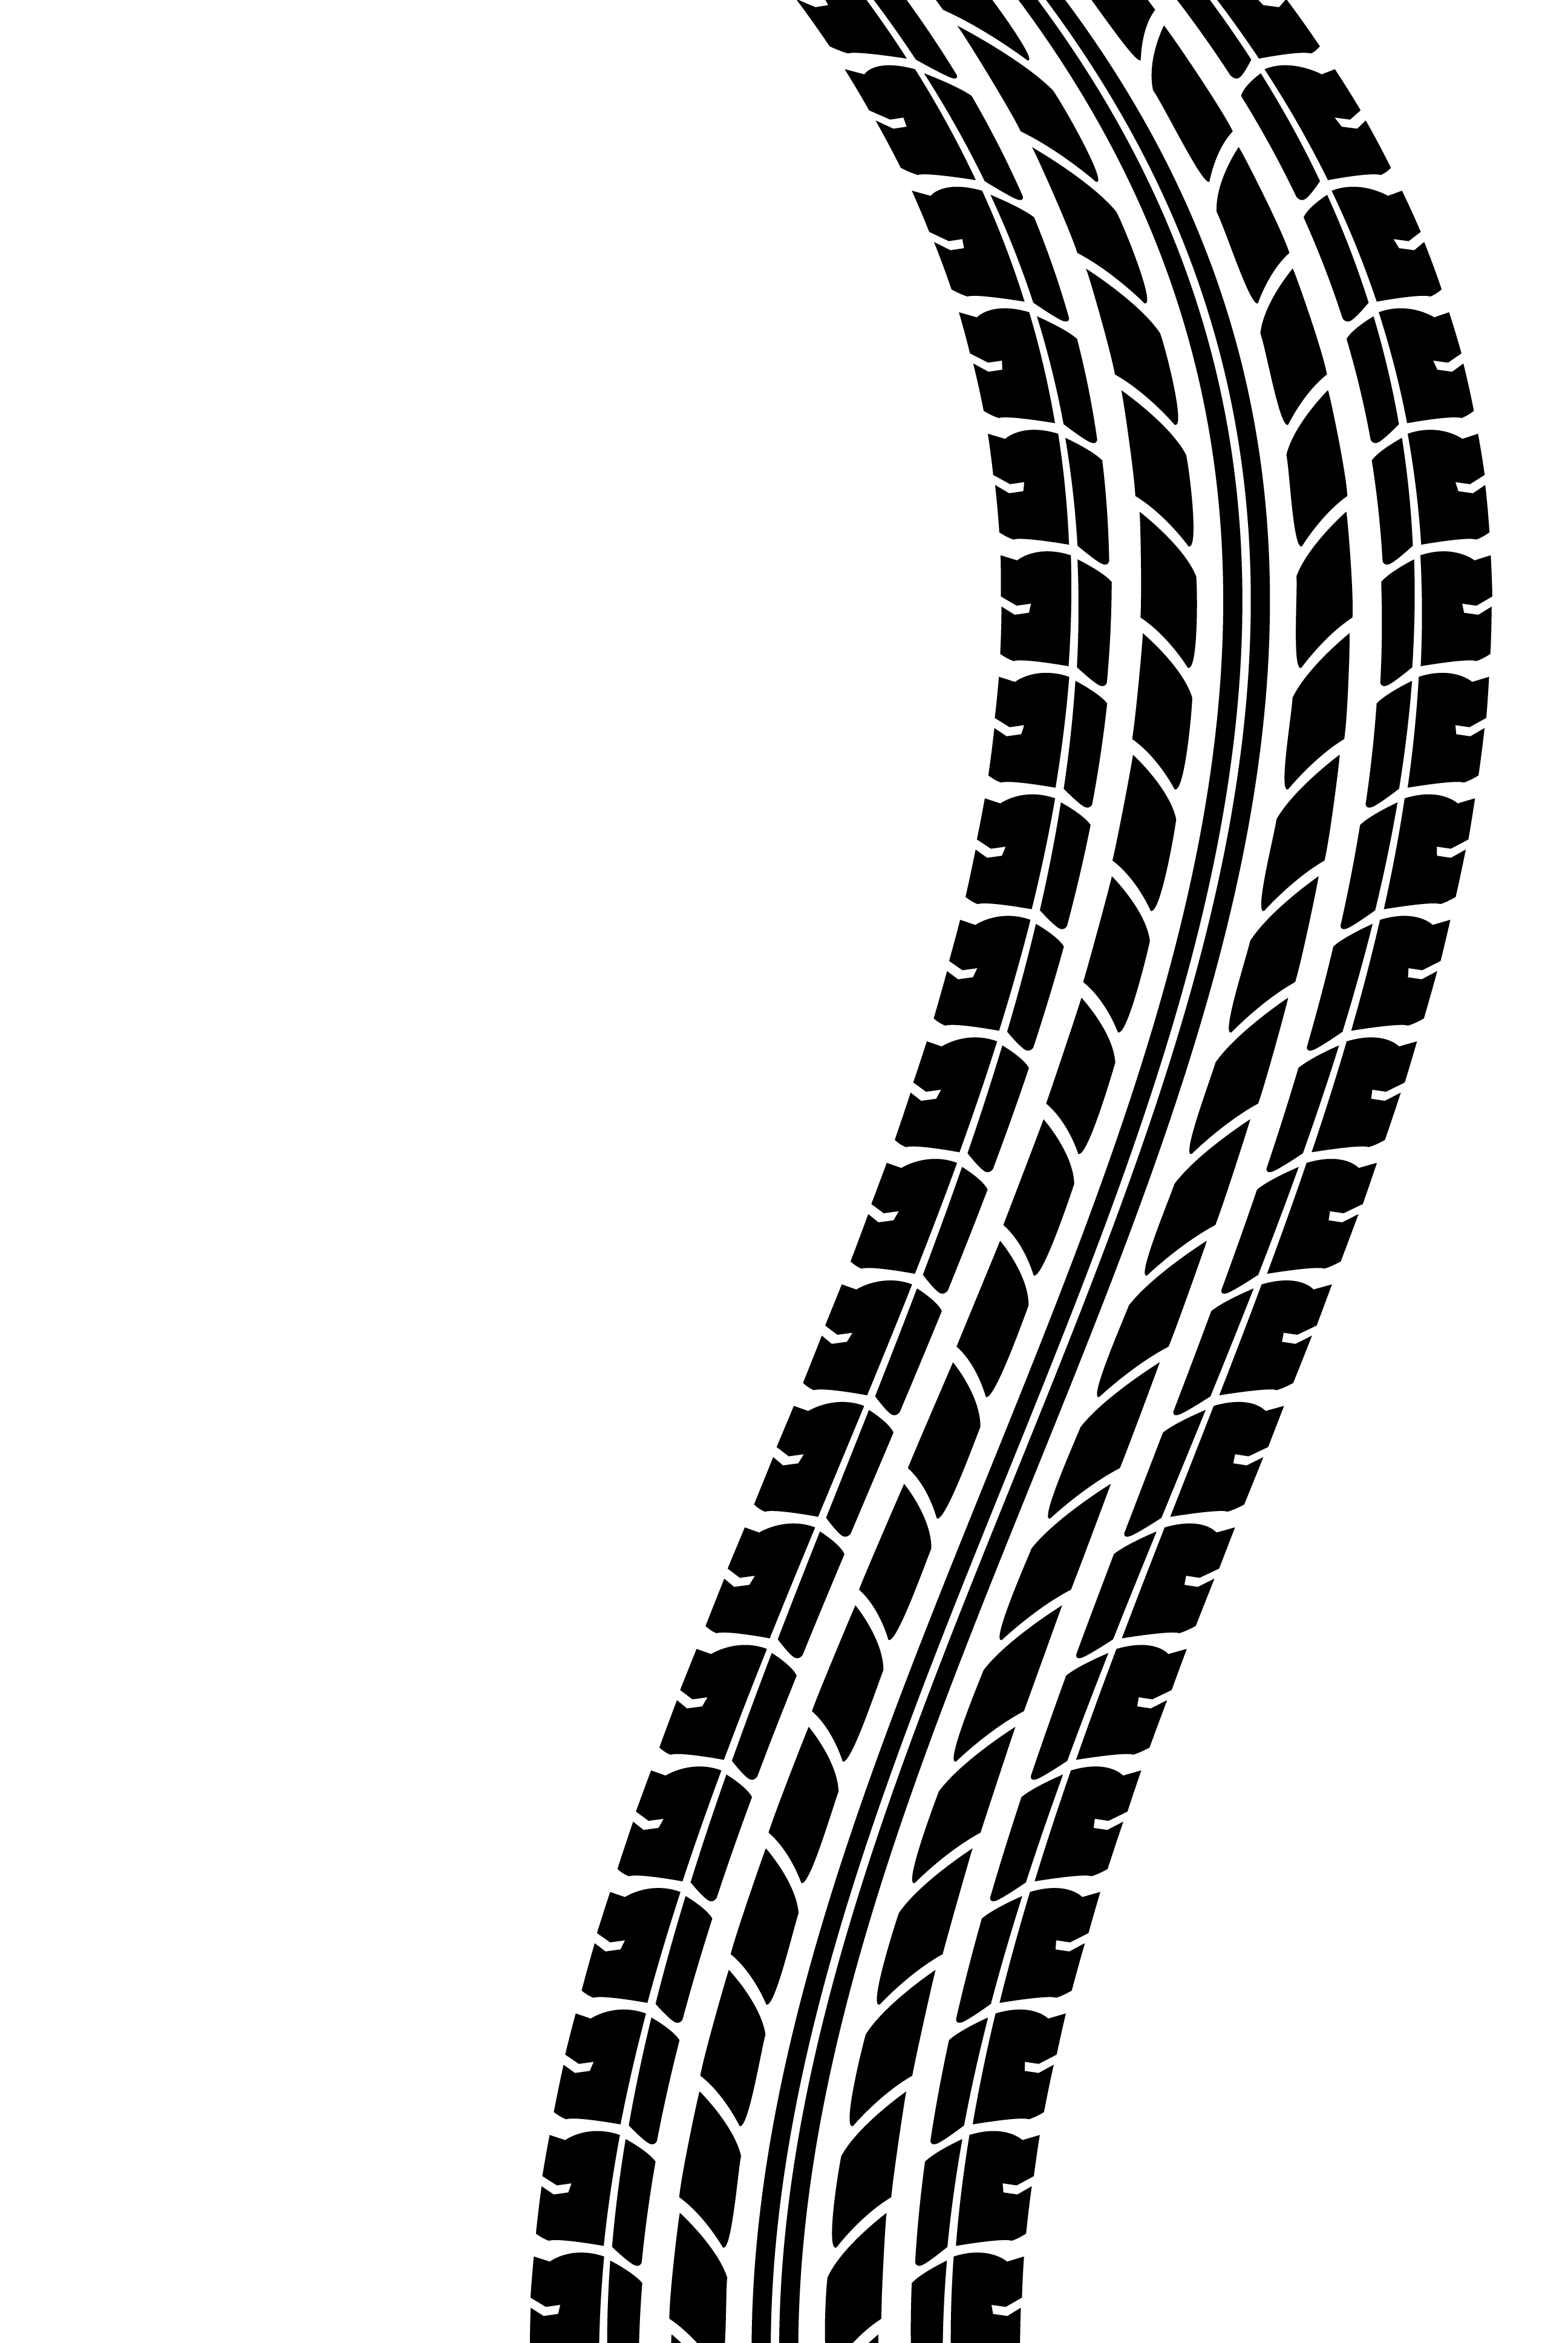 Photo Tire Track Tyre Wheel Car Vector Clipart Stock Image Clipart